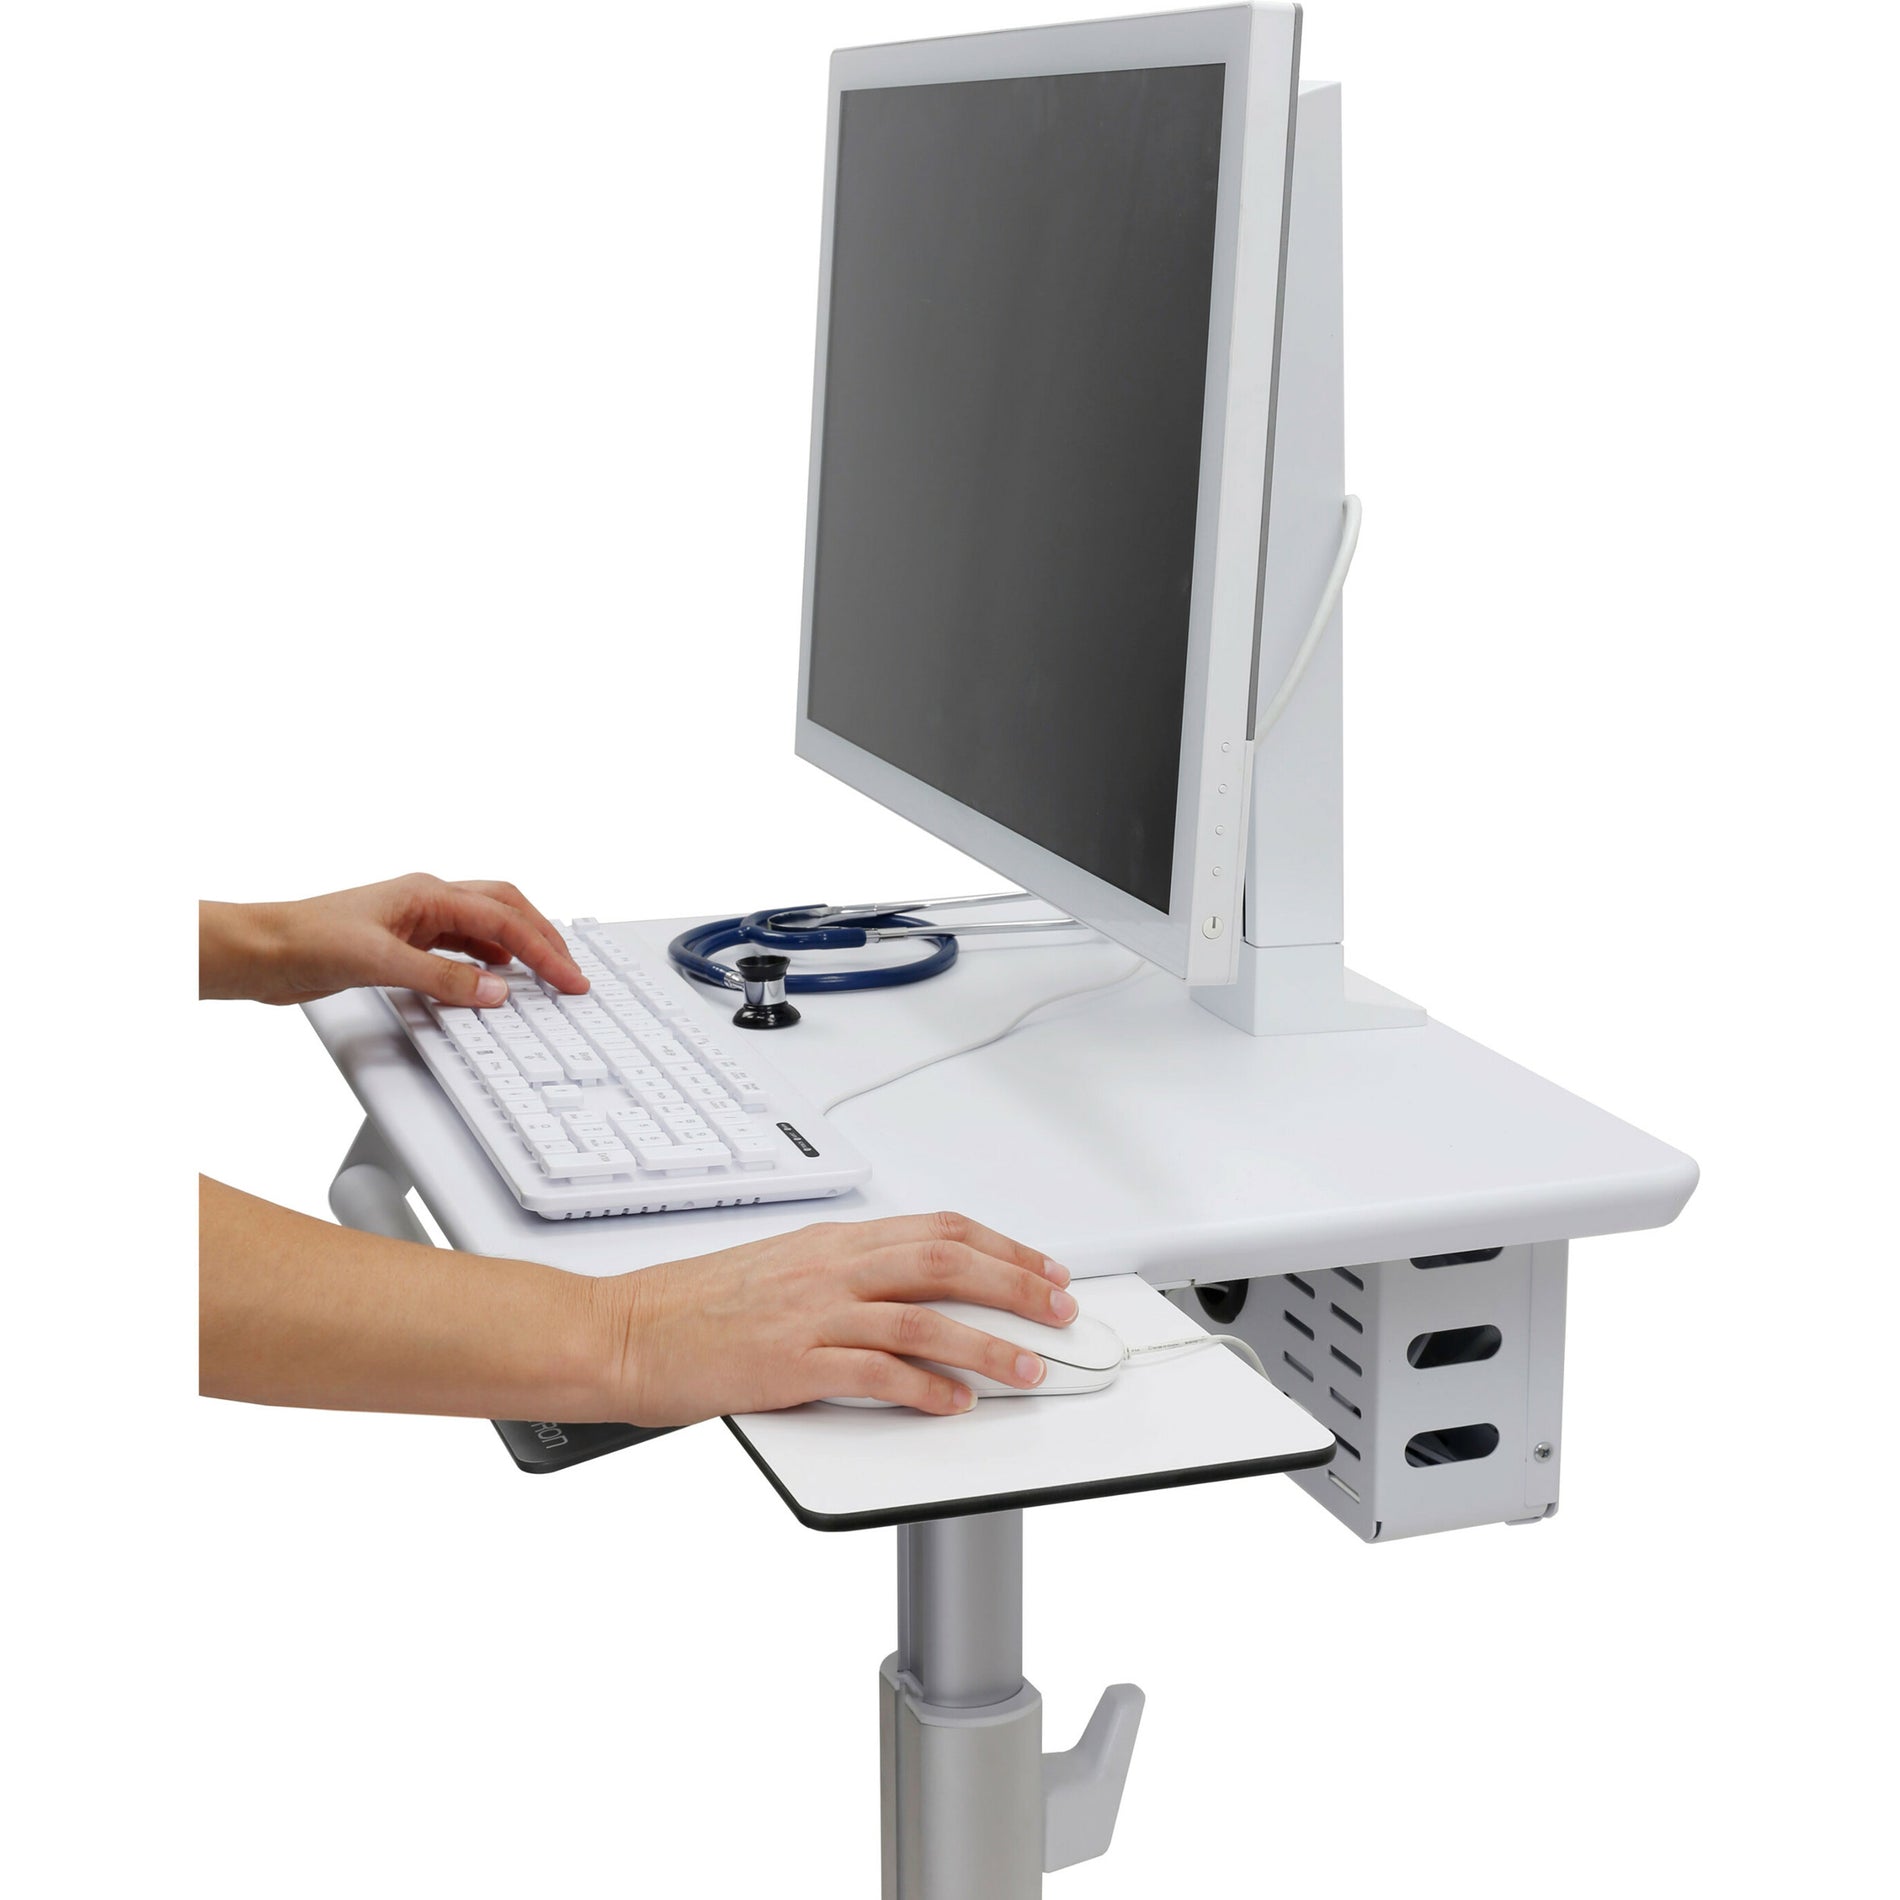 Ergotron SV10-1300-0 StyleView Lean WOW Cart, Lightweight Medical Cart with Sliding Mouse Tray, Cable Management, and Adjustable Height